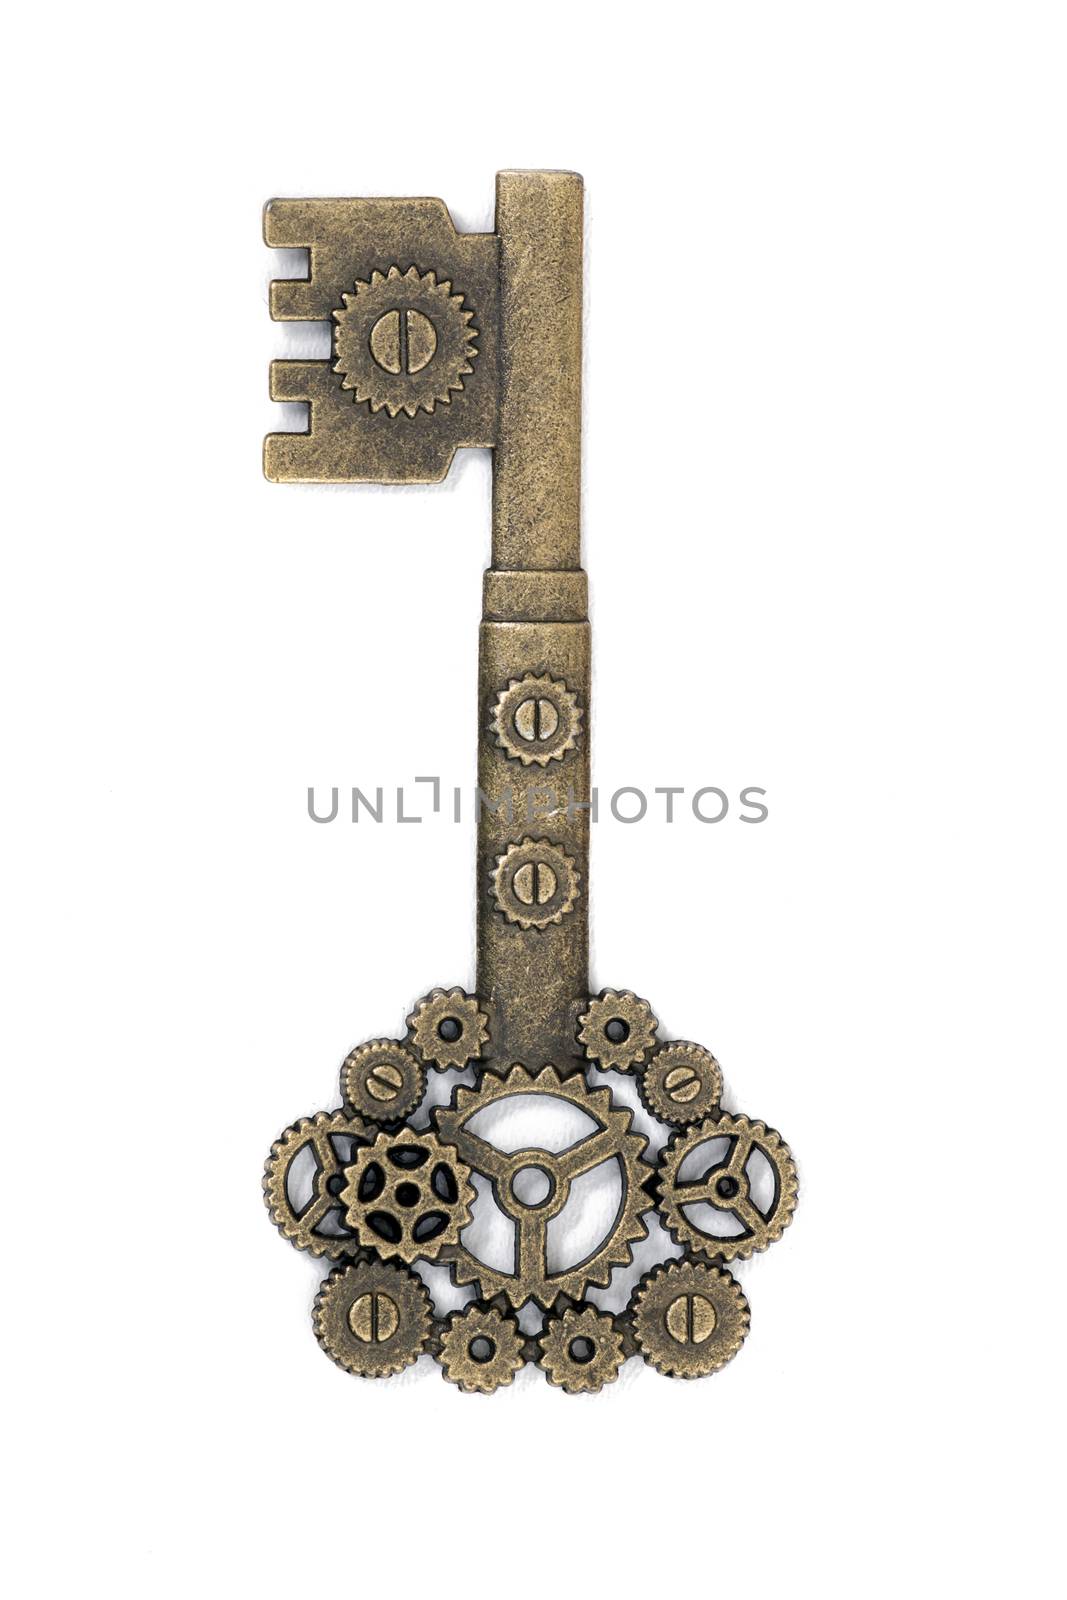 vintage fantasy detailed golden key isolated on a white background.